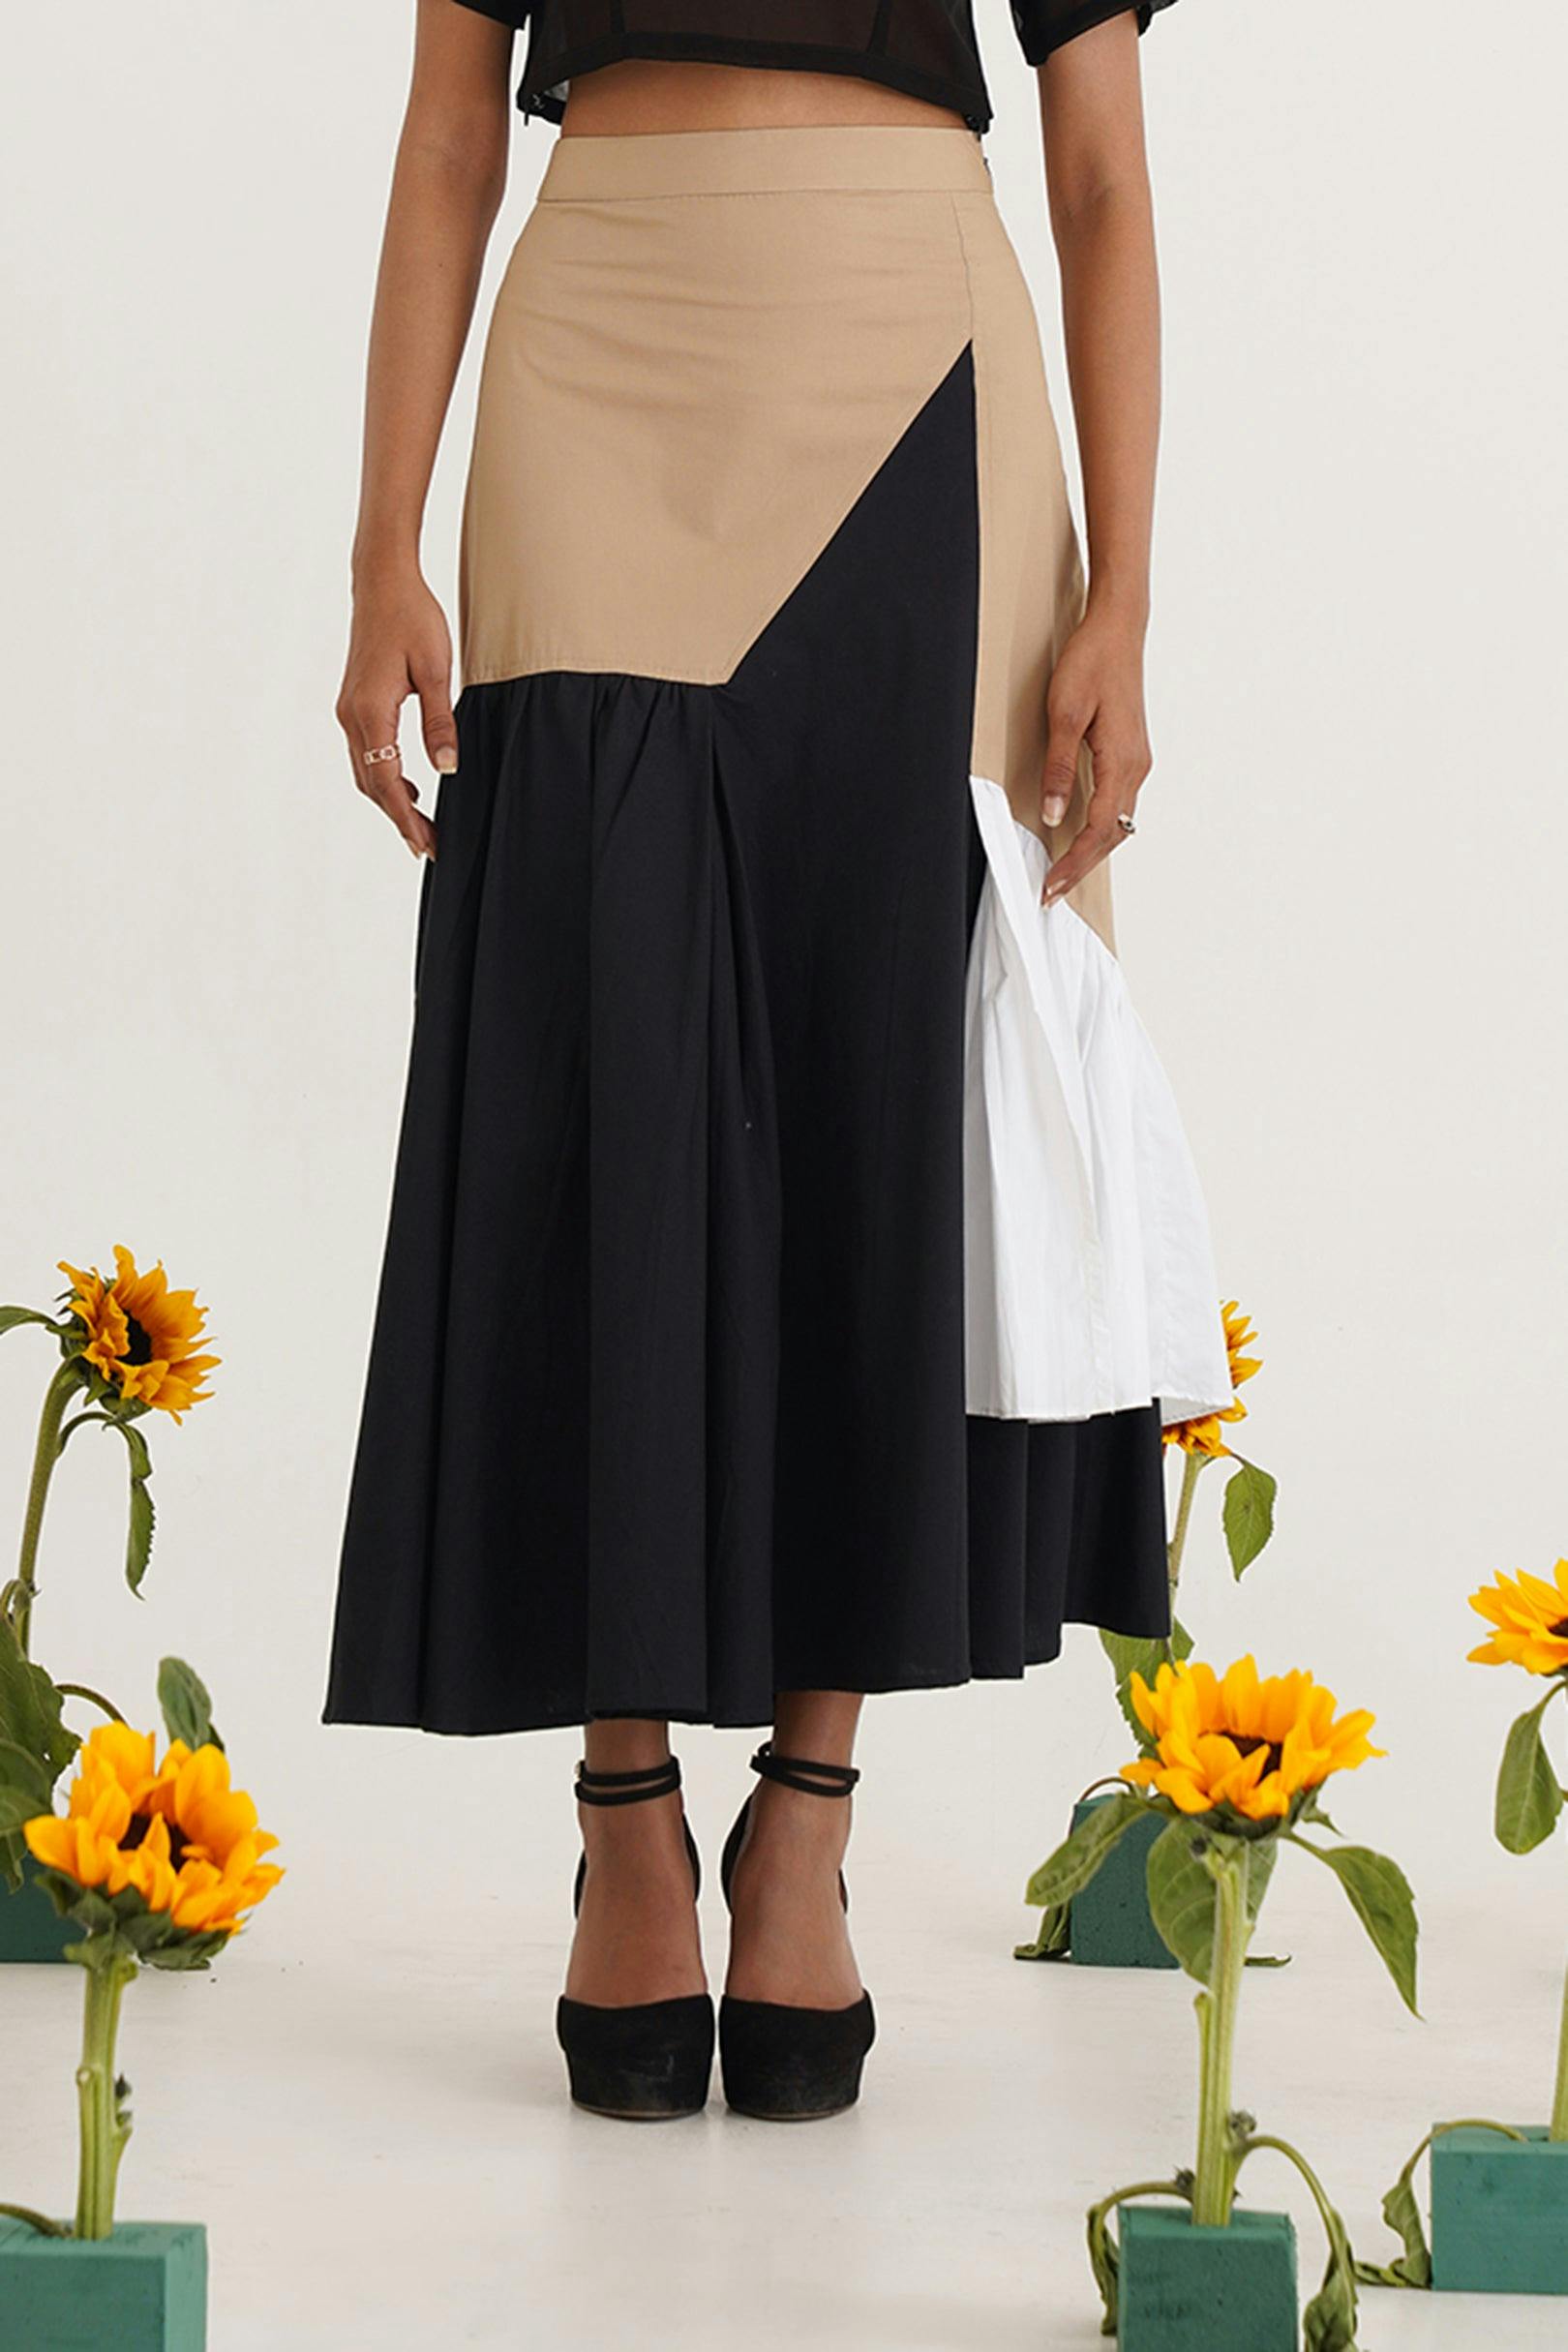 Lyric Skirt, a product by Sunandini